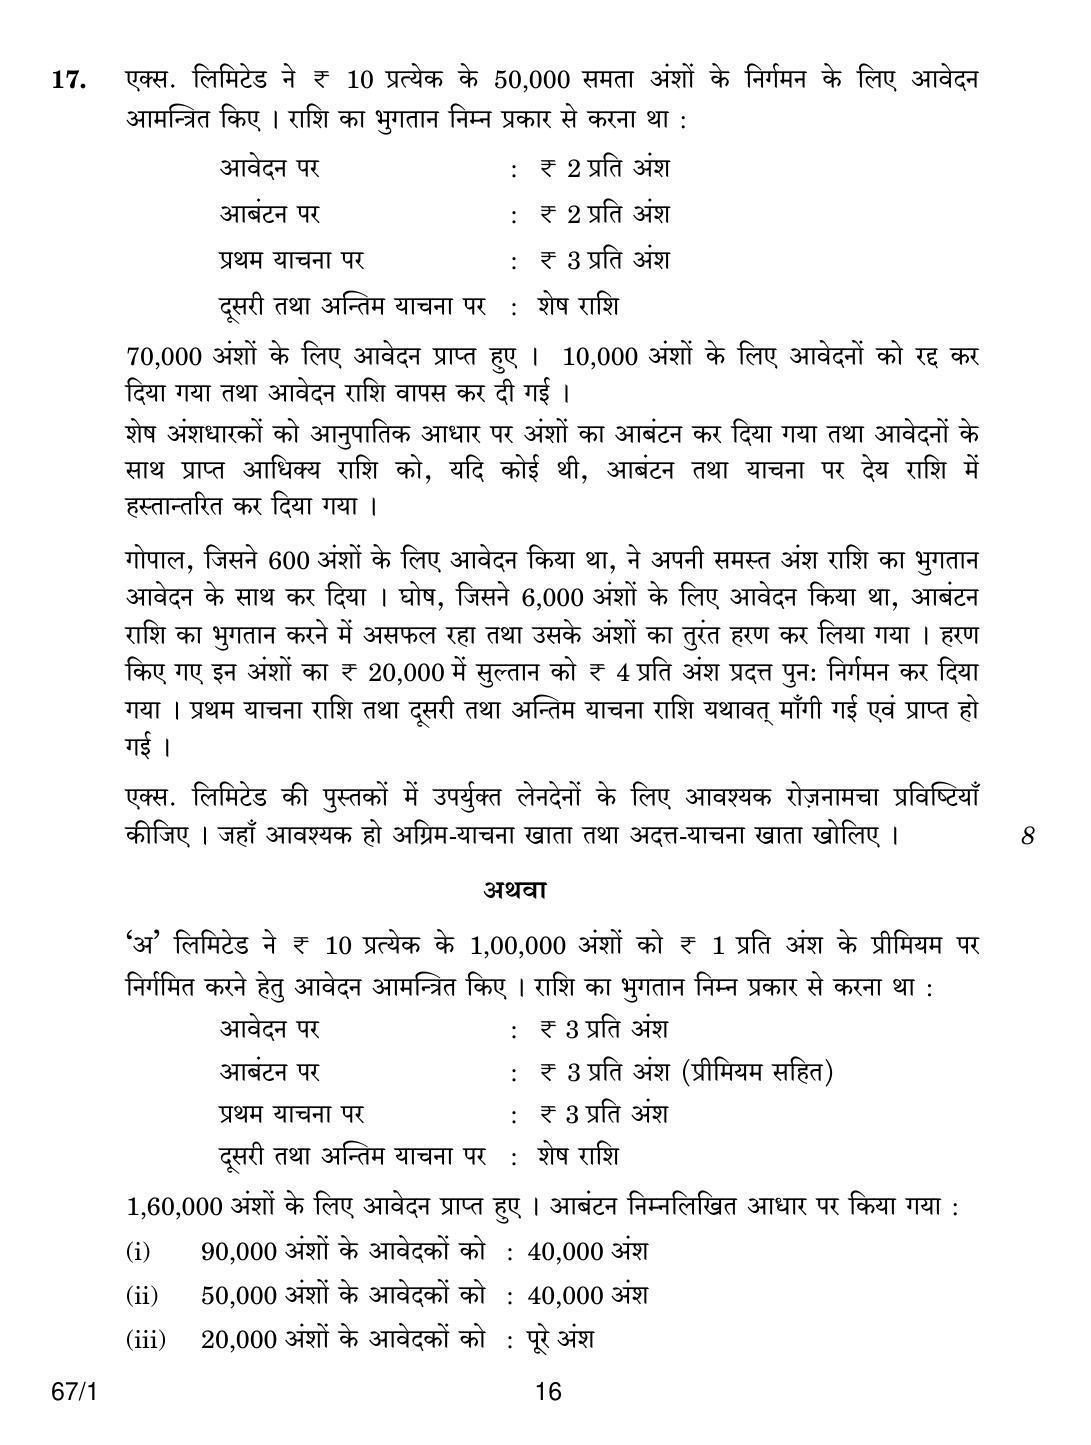 CBSE Class 12 67-1 ACCOUNTANCY 2018 Question Paper - Page 16